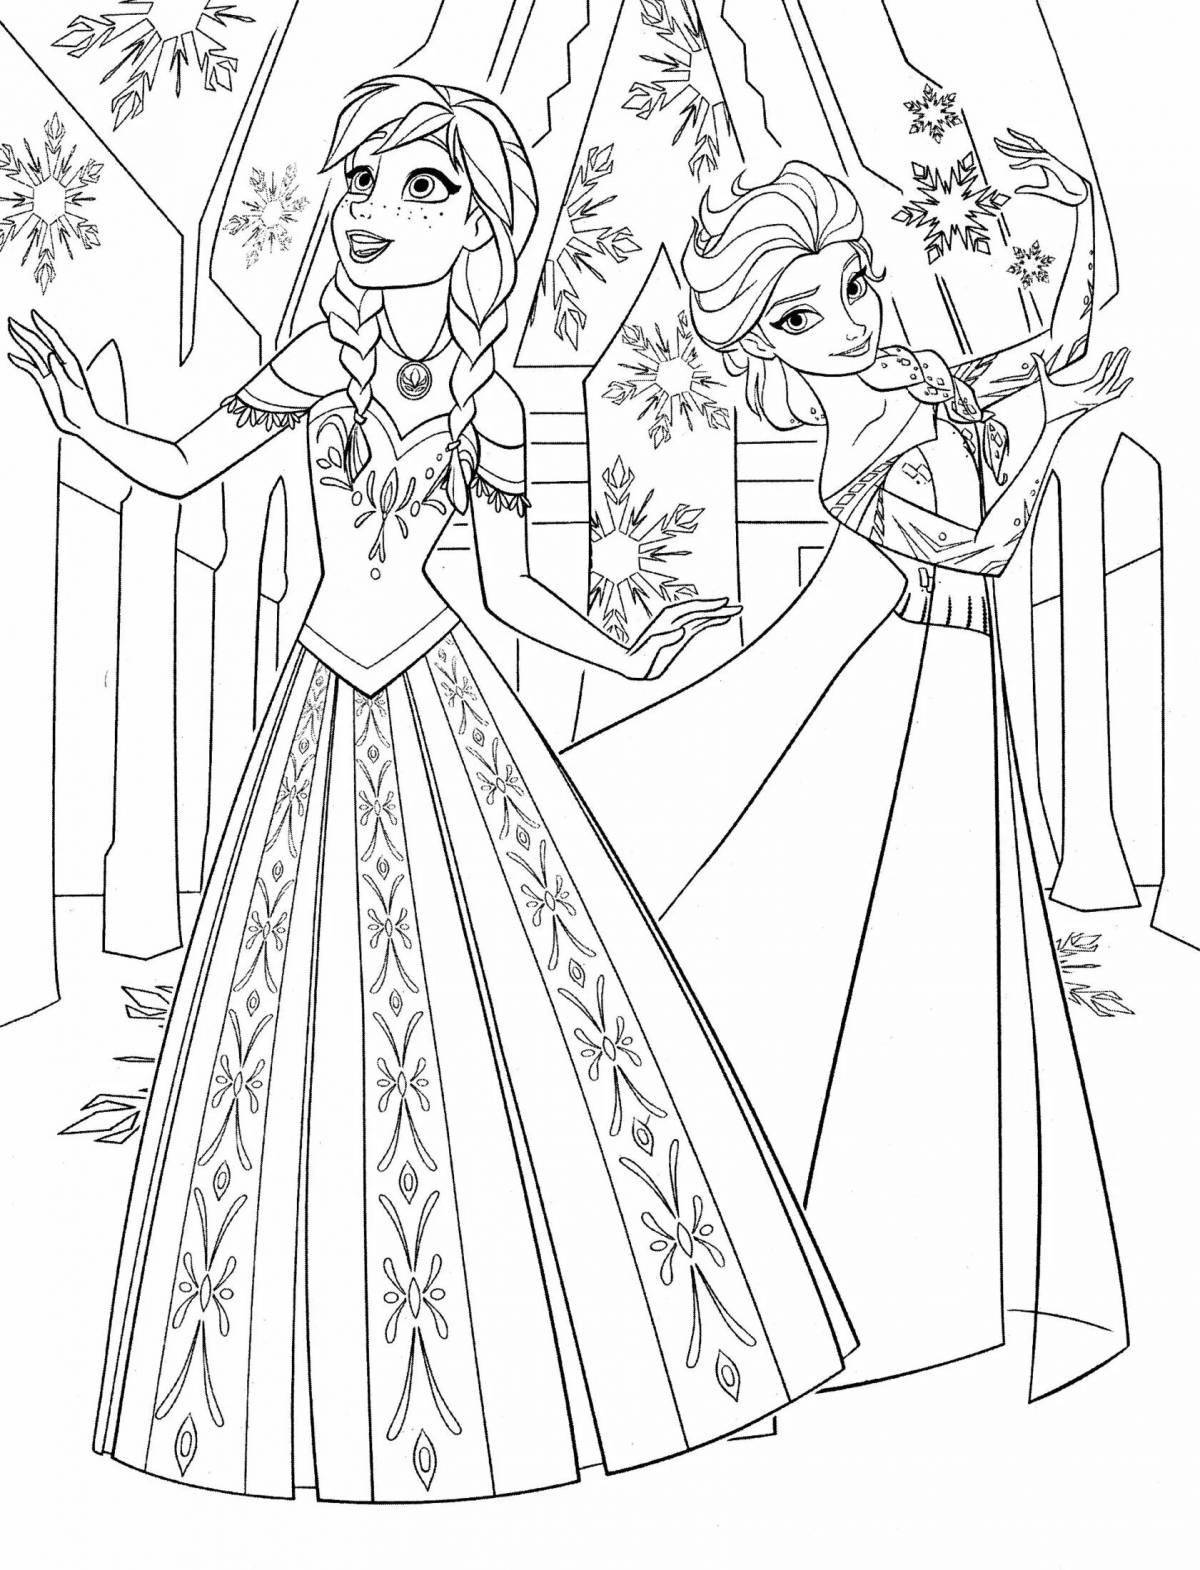 Adorable Frozen Coloring Page for 6-7 year olds